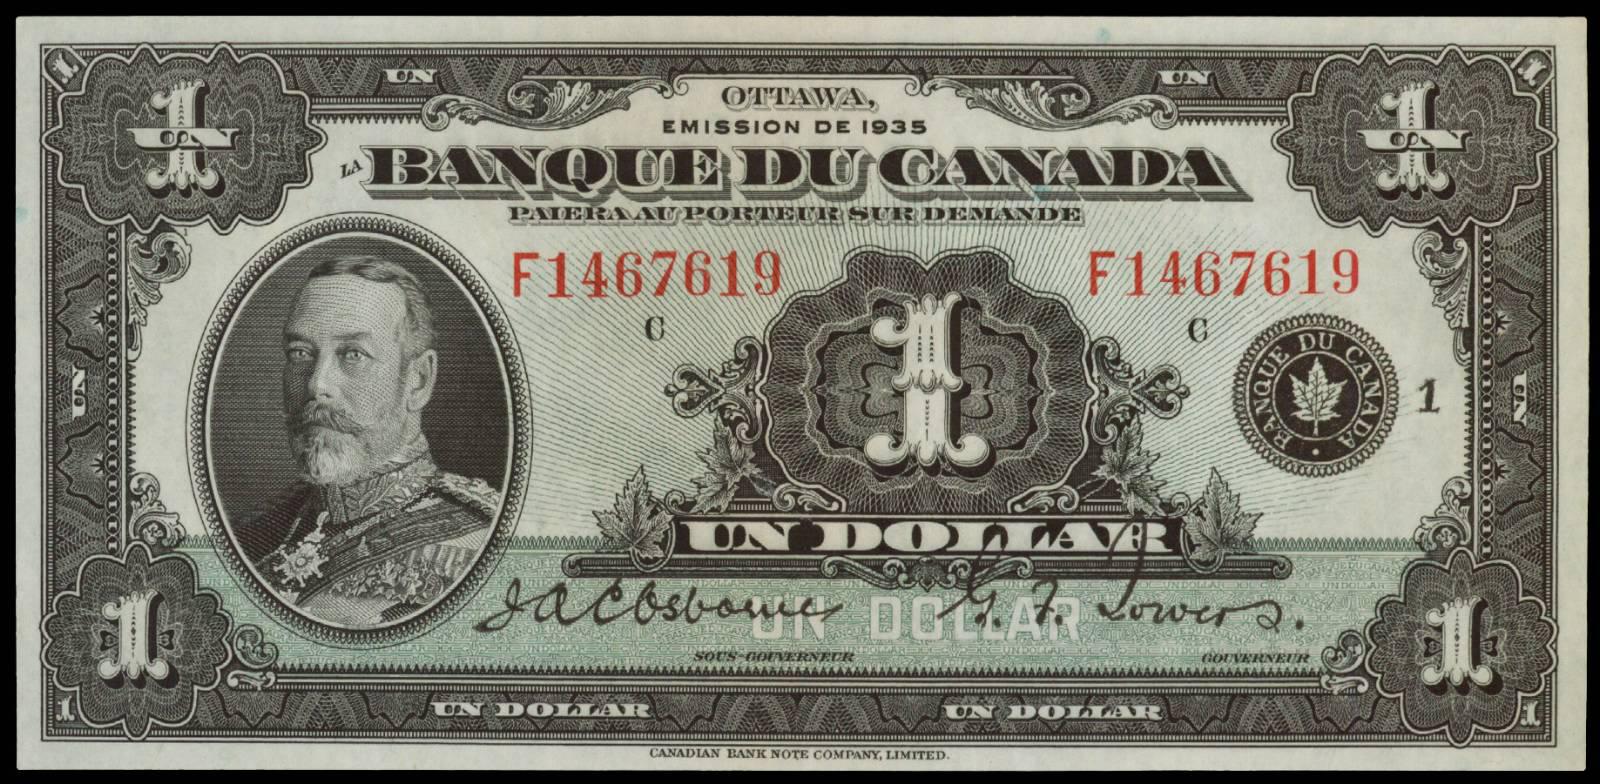 Value Of 1935 1 Bill From Banque Du Canada Canadian Currency